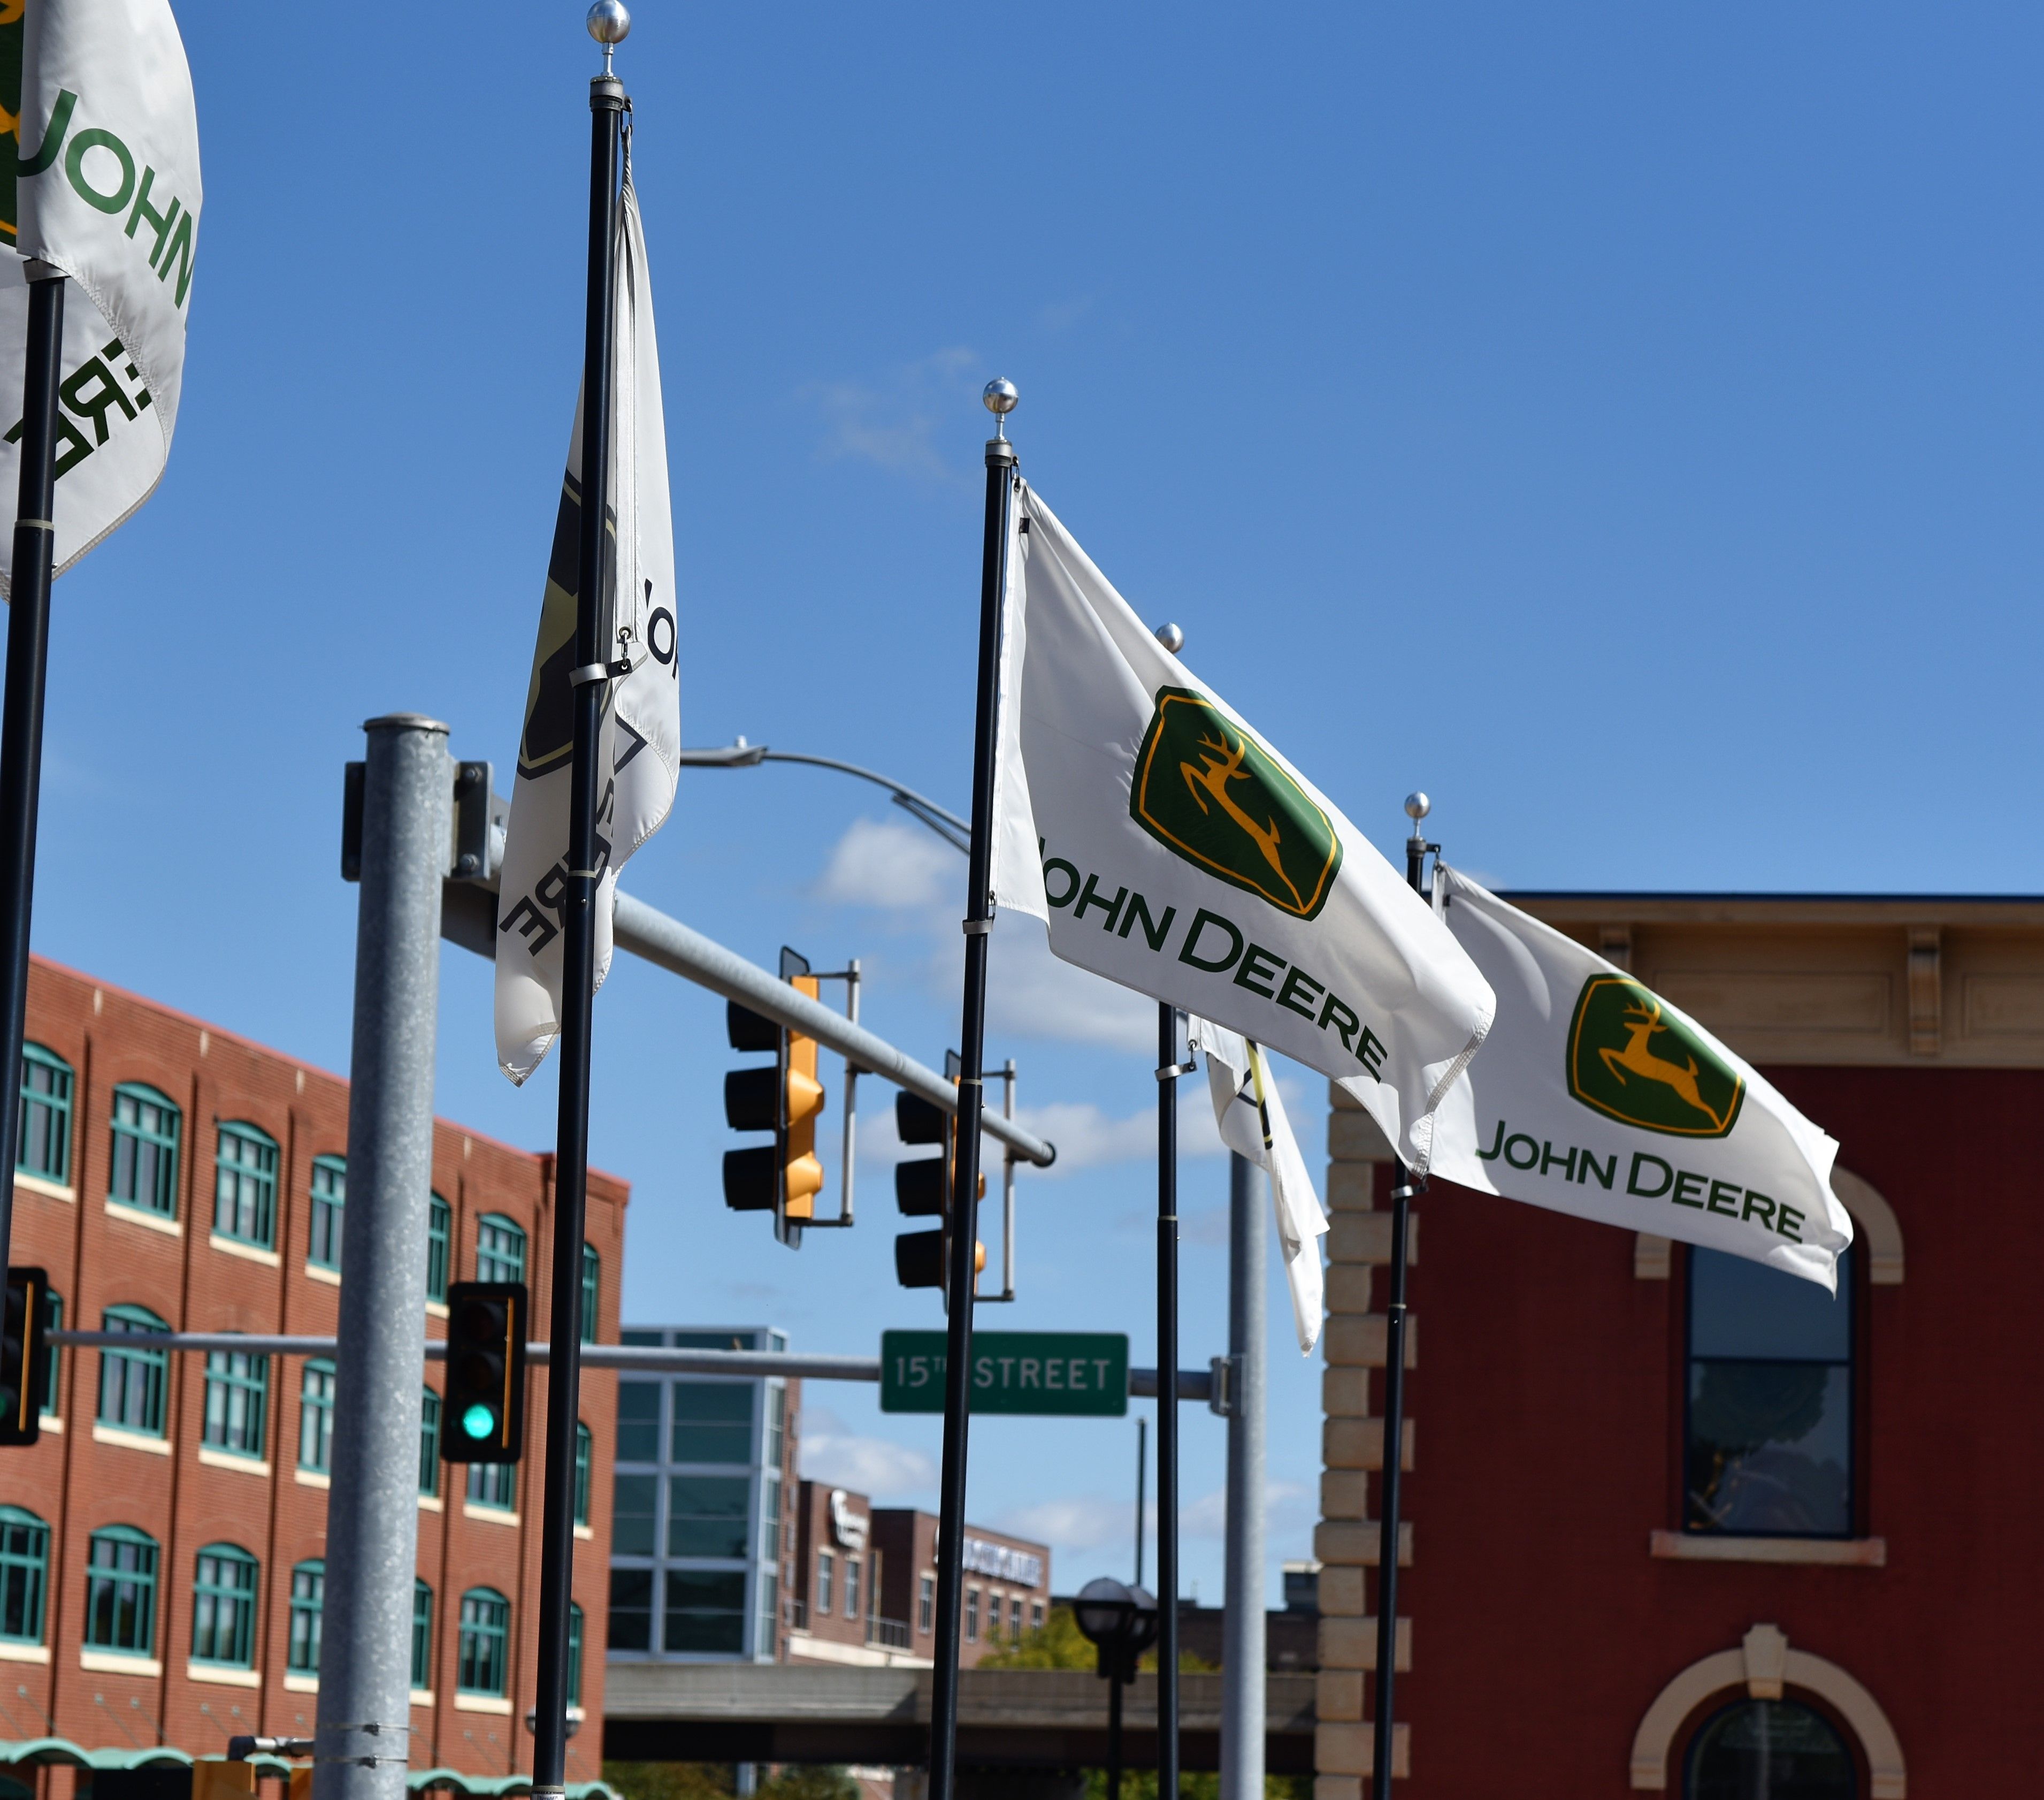 September 2018, Moline, IL, John Deere Flags waving in front of the Pavilion. Image by Florida Chuck/Shutterstock. United States, 2018.